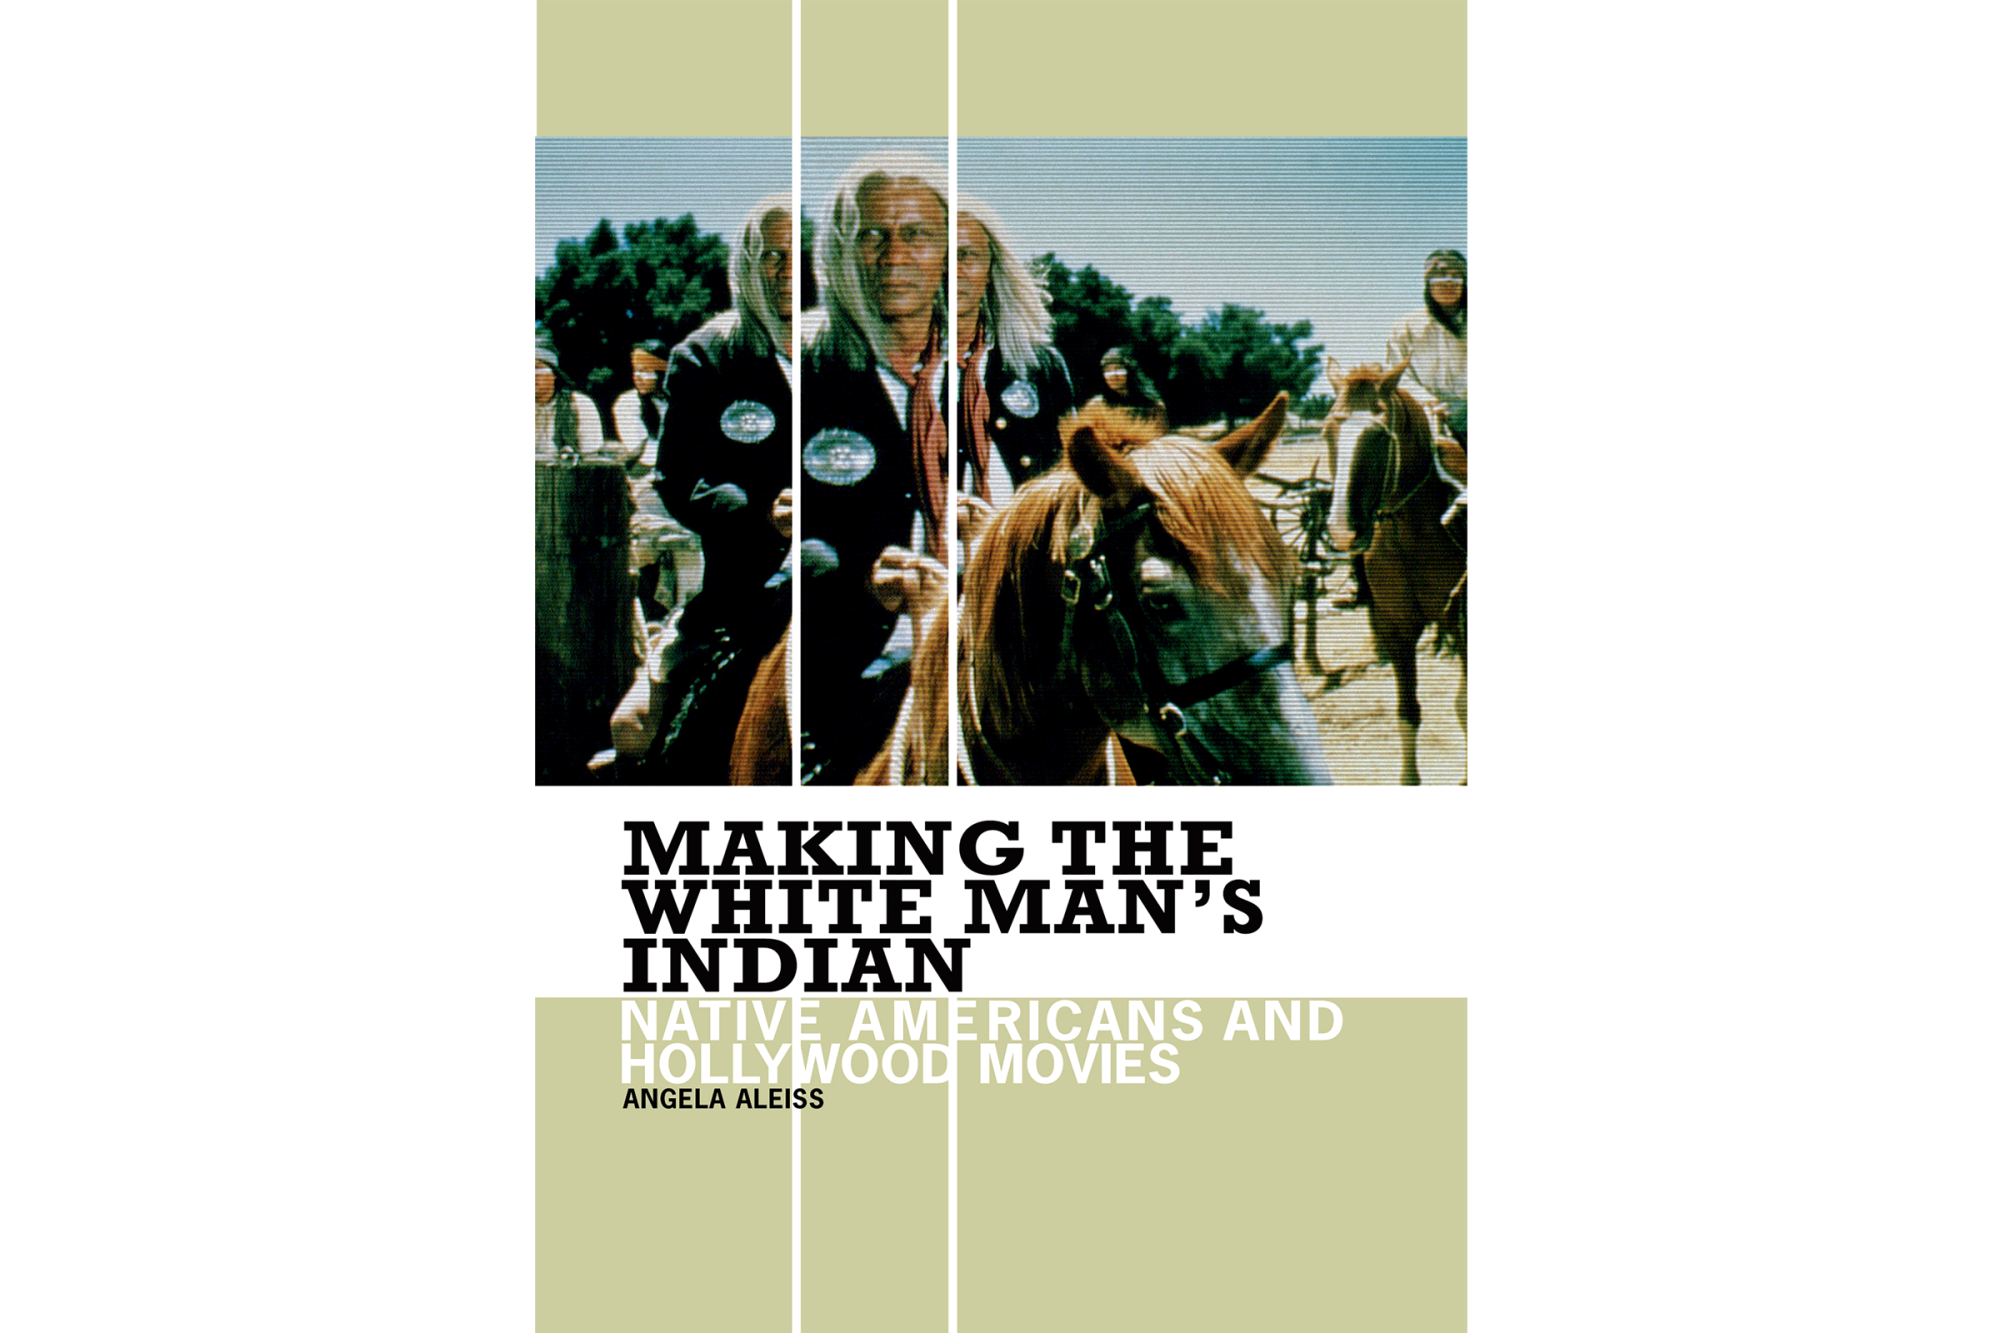 "Making the White Man's Indian: Native Americans and Hollywood Movies" by Angela Aleiss